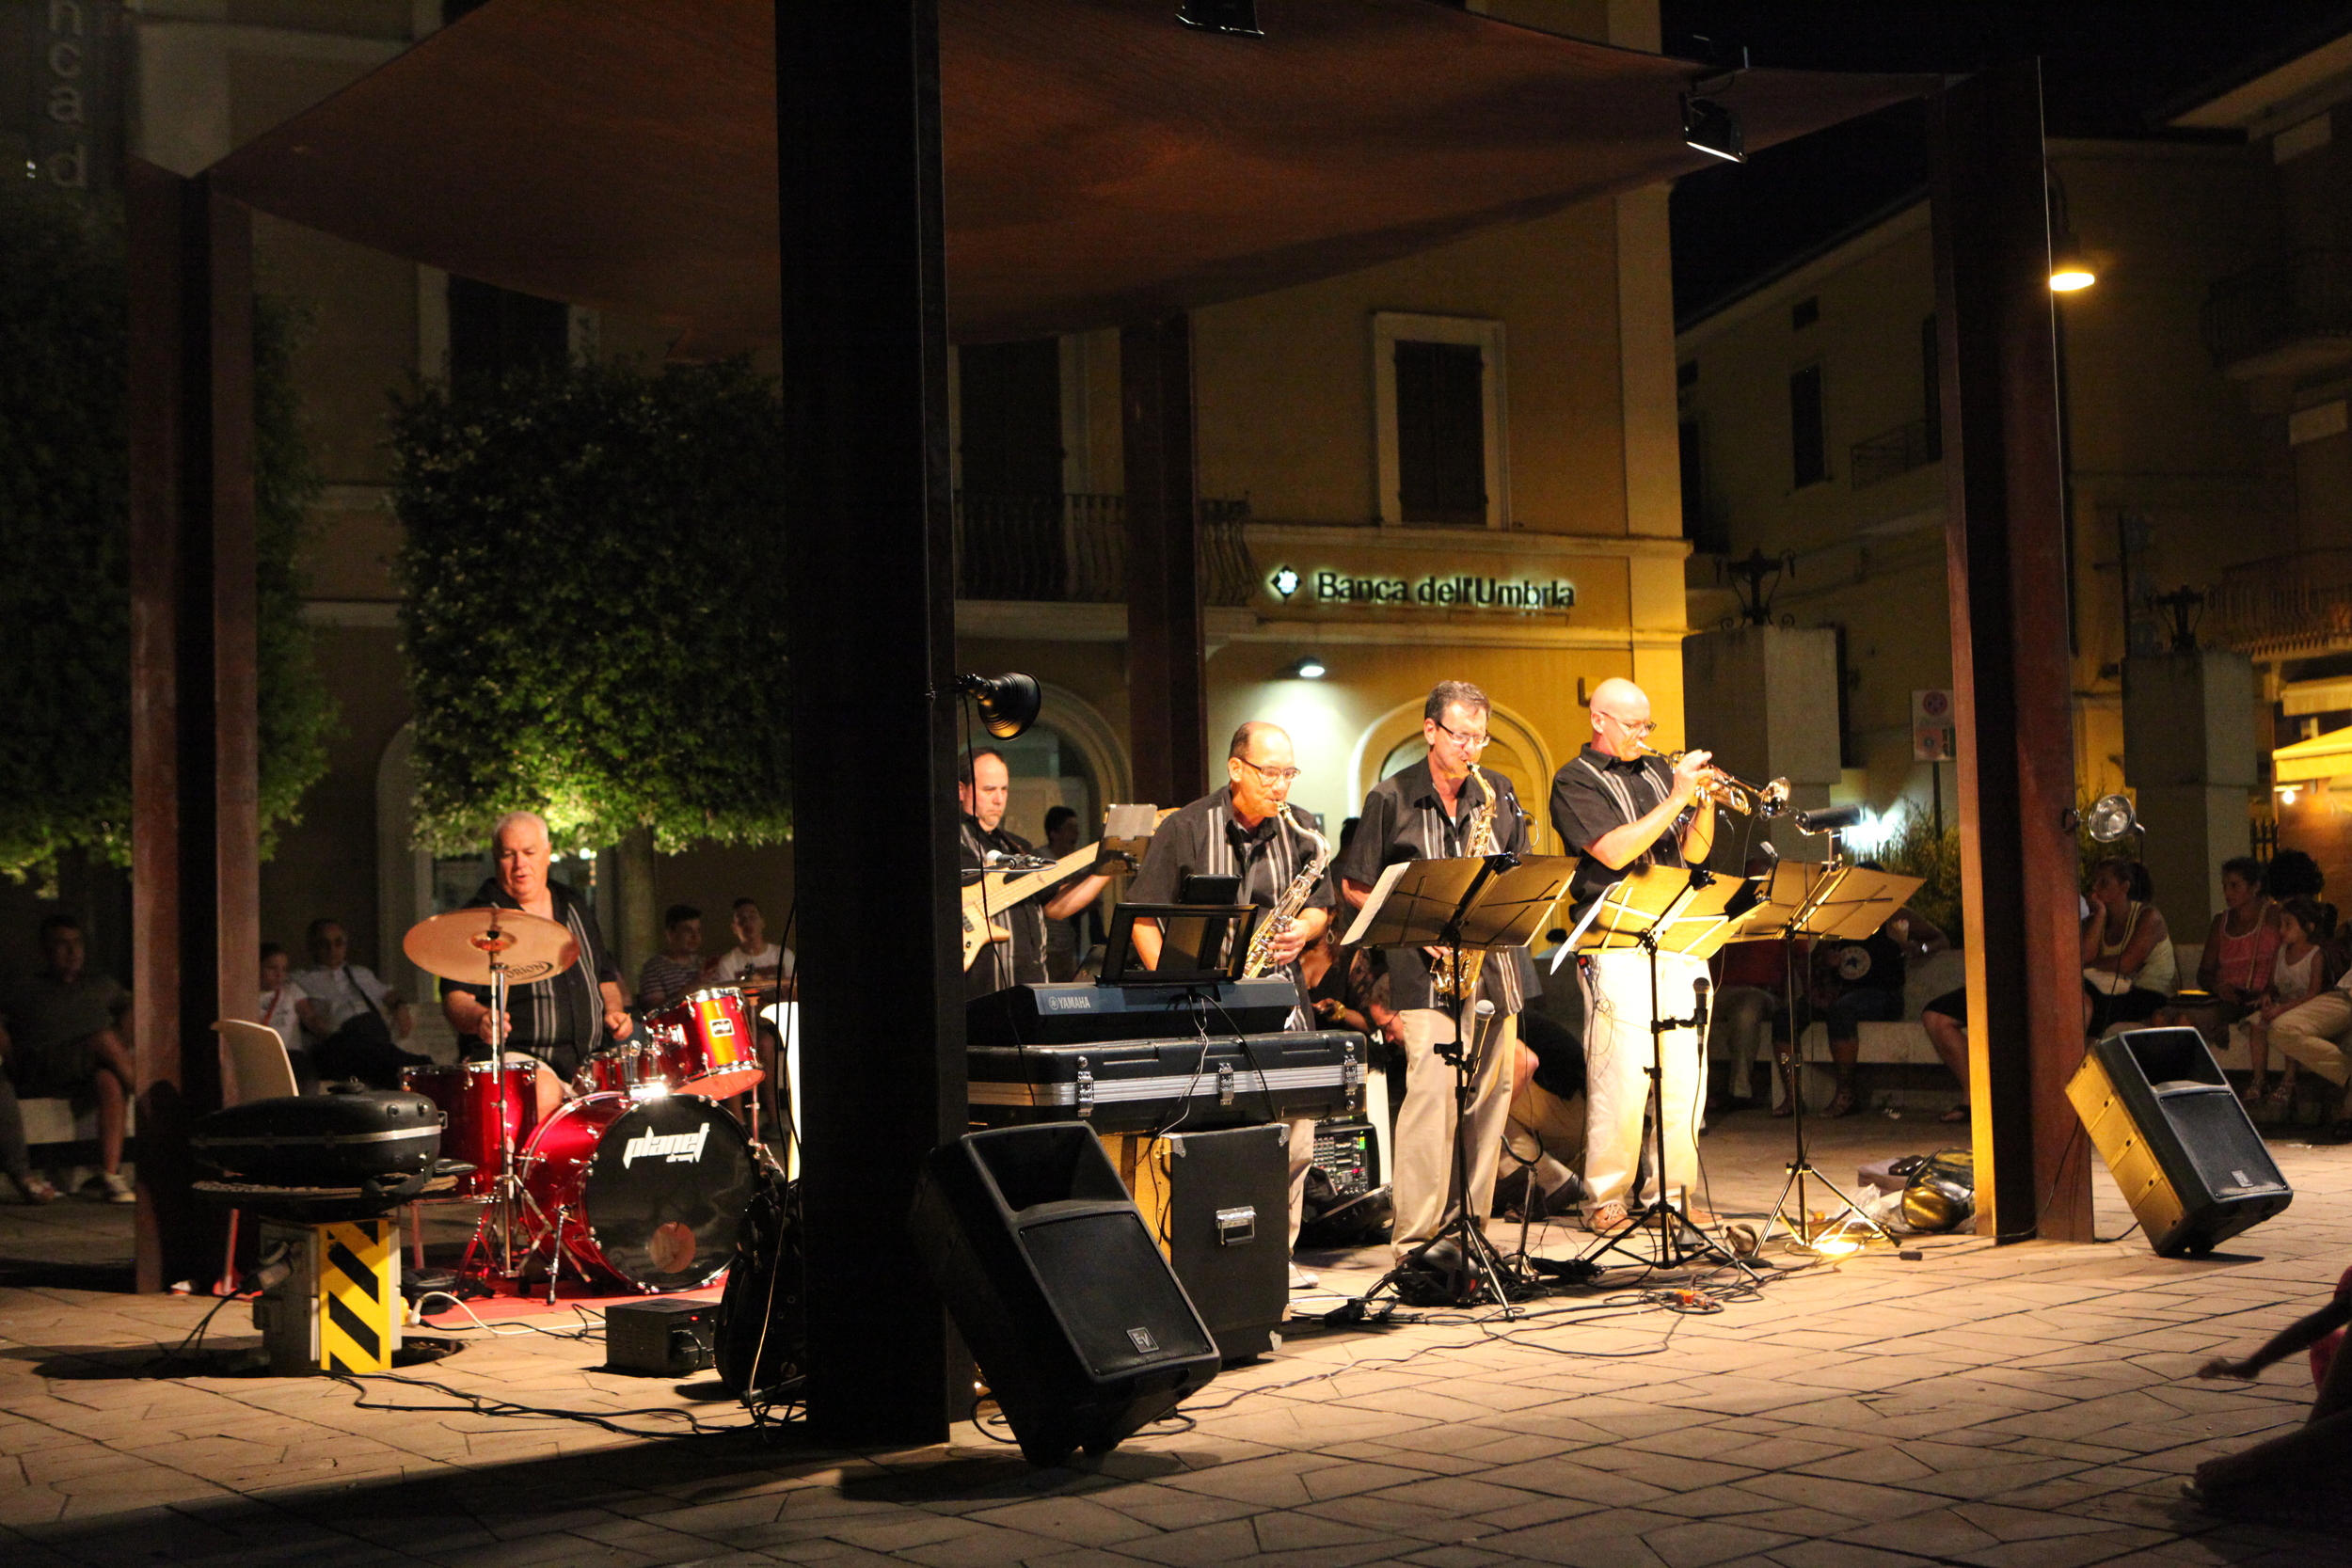 Copy of Performing in the Piazza